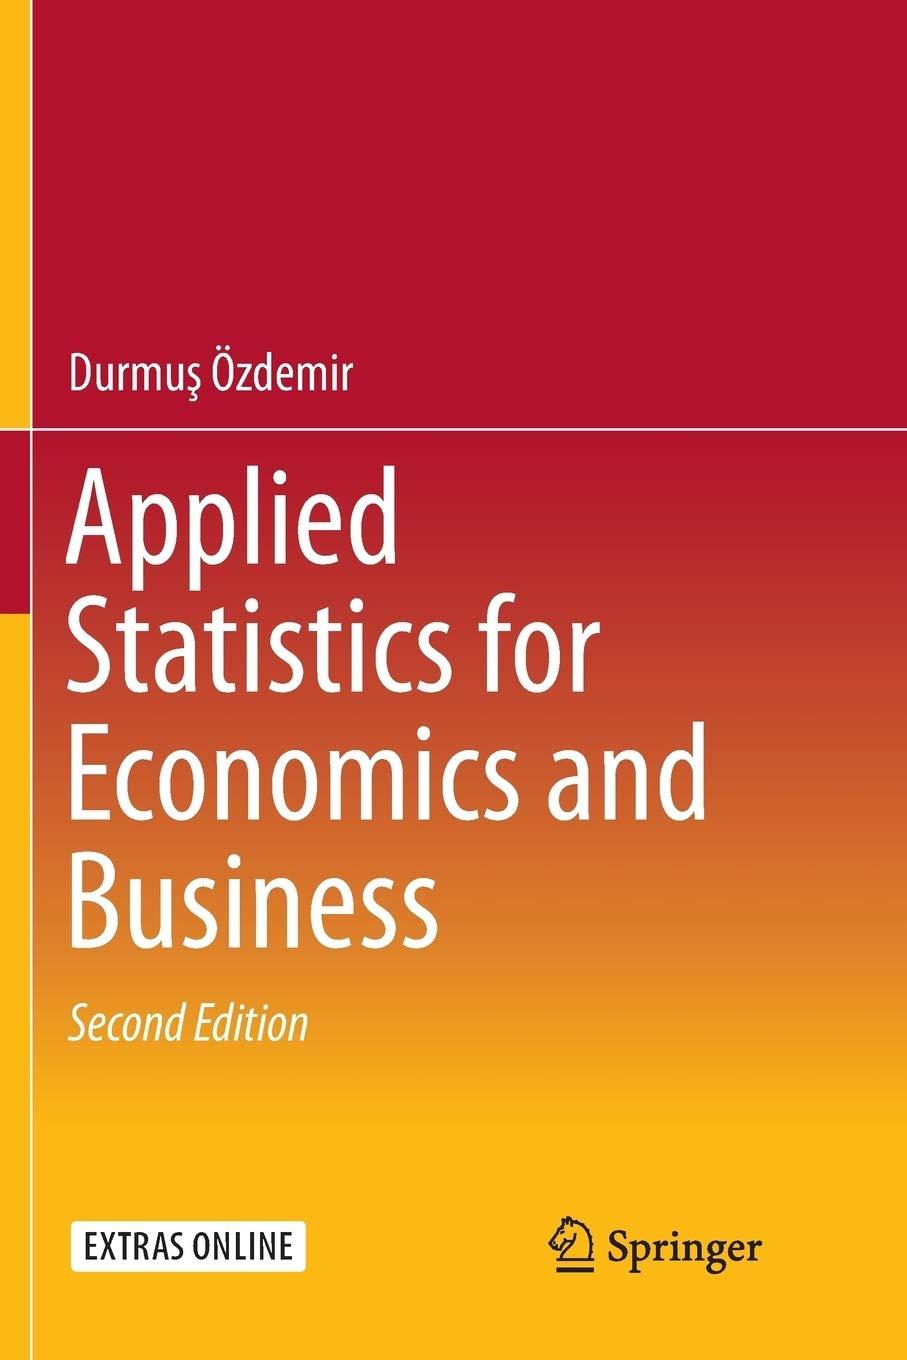 applied statistics for economics and business 2nd edition durmu? ozdemir 3319799622, 9783319799629